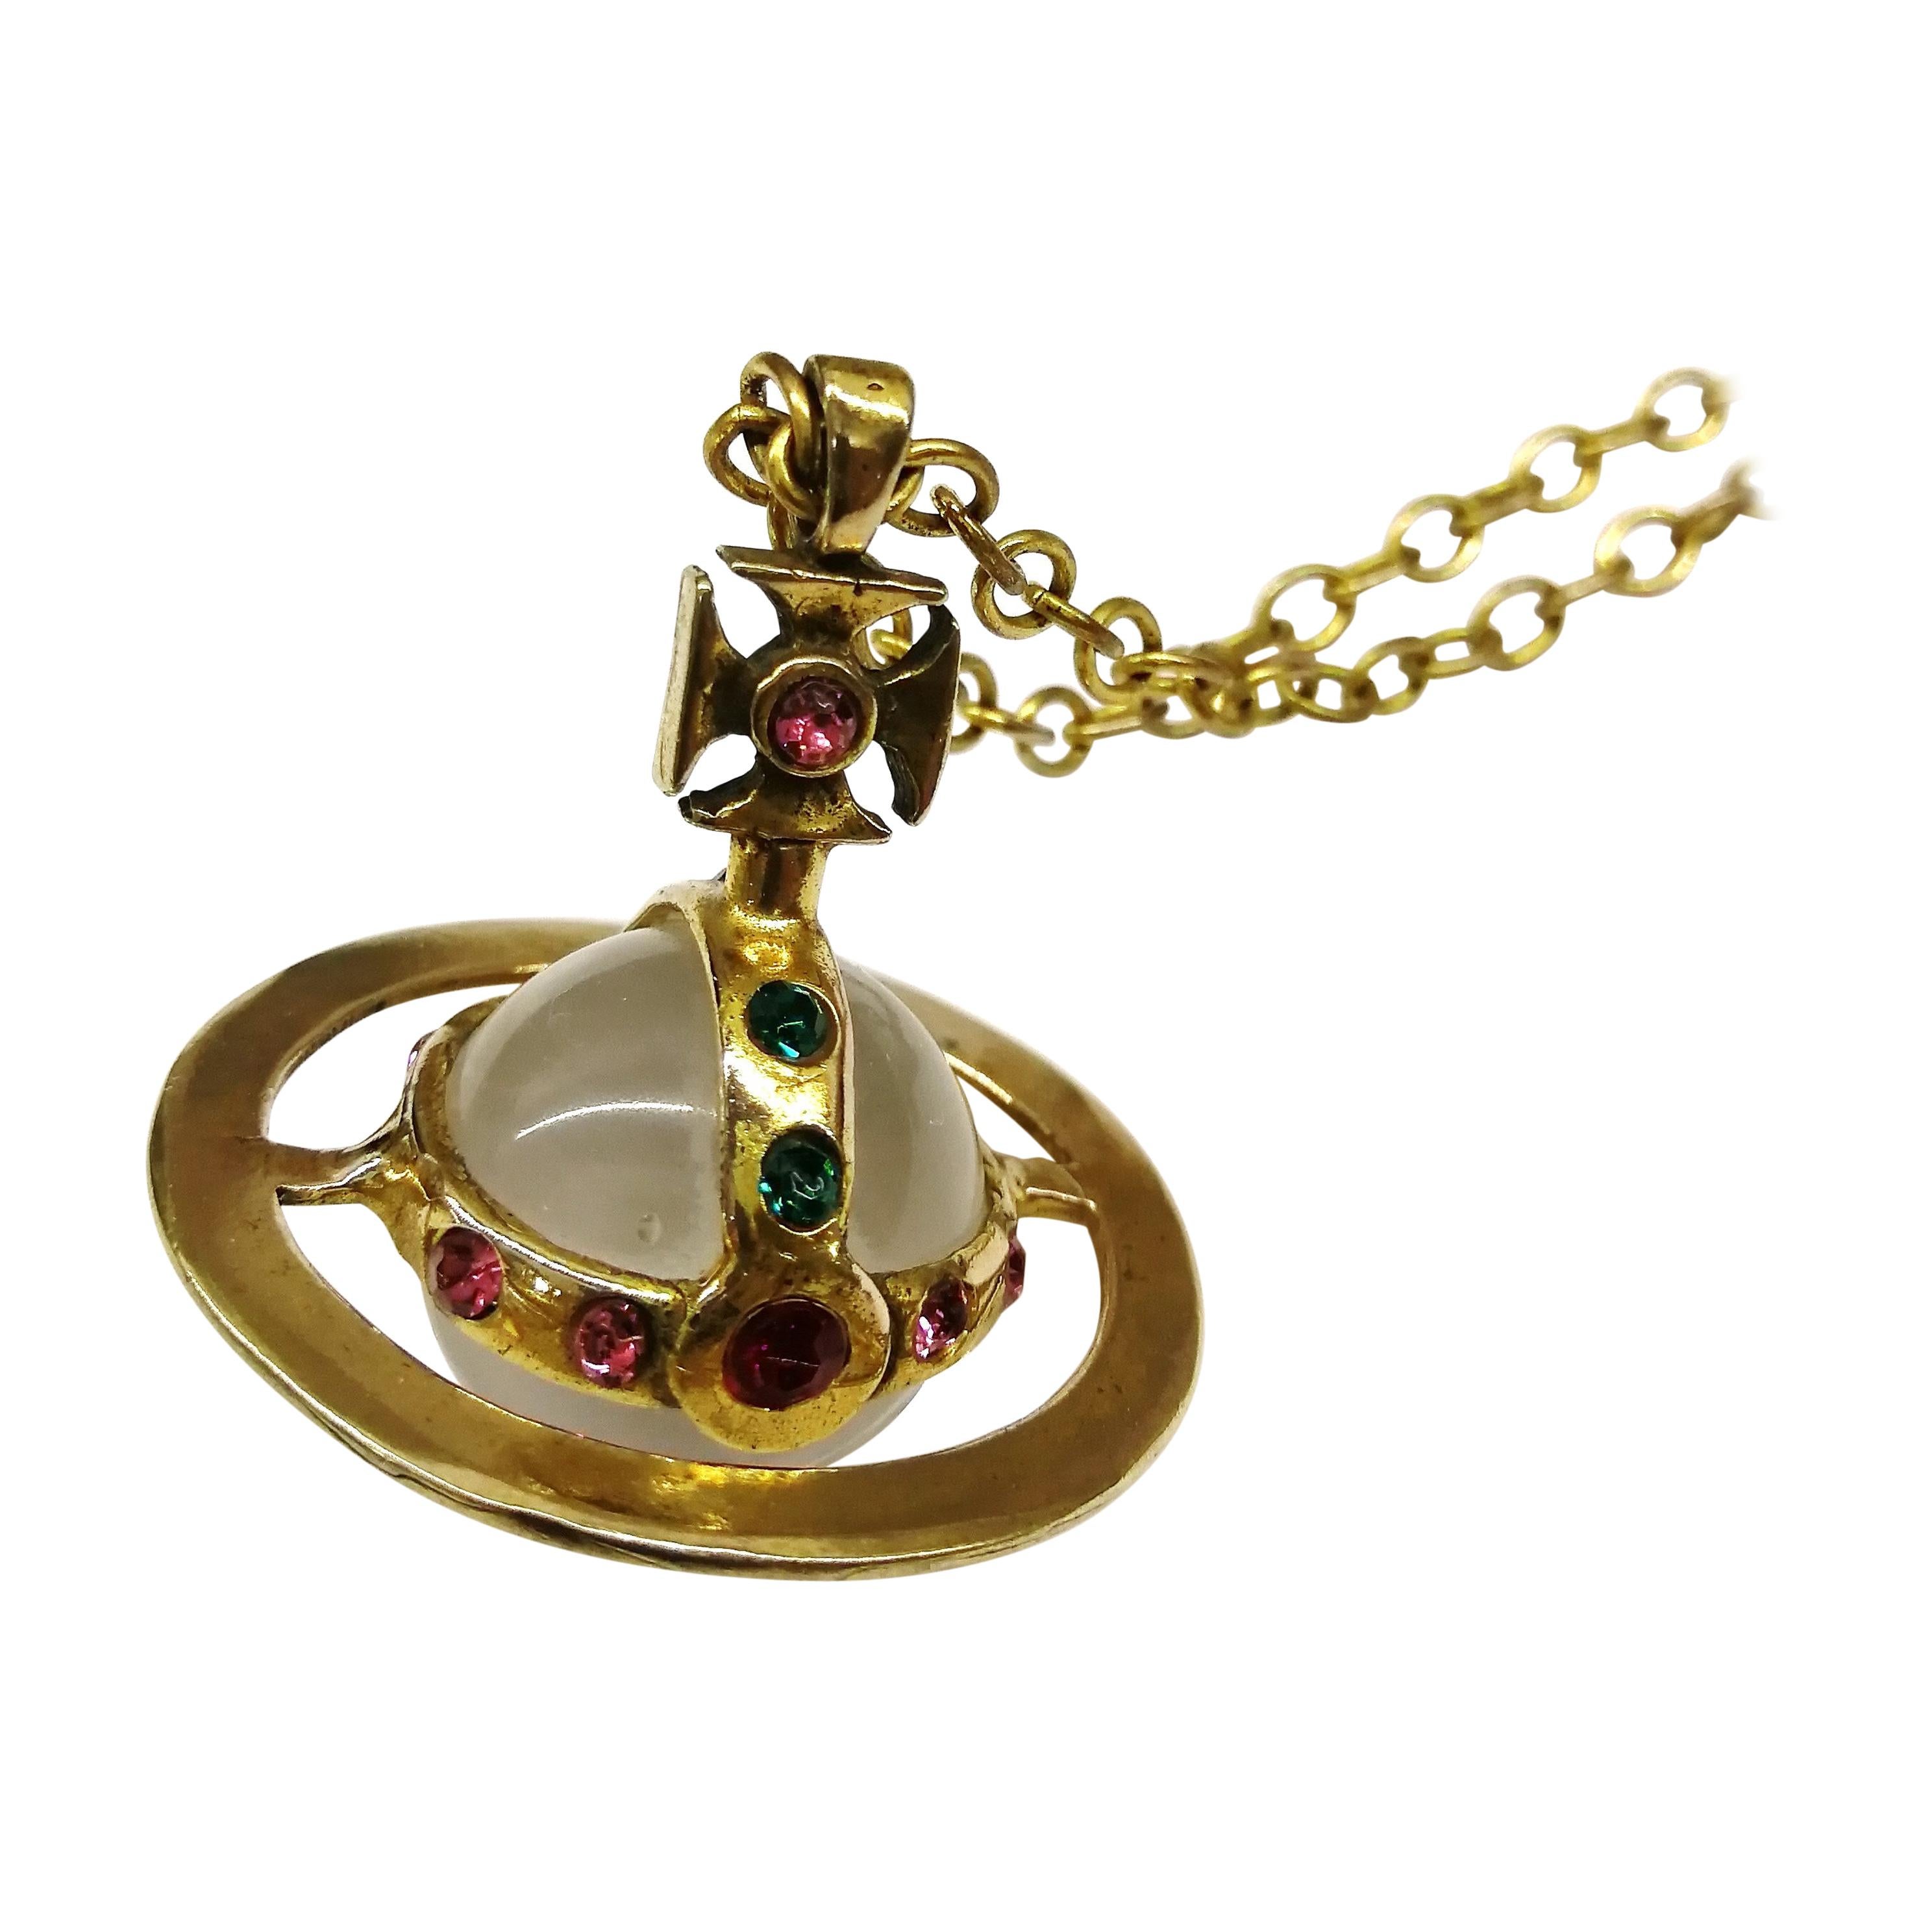 Small lucite, gilt metal and coloured paste 'orb' pendant, V Westwood, 1980s